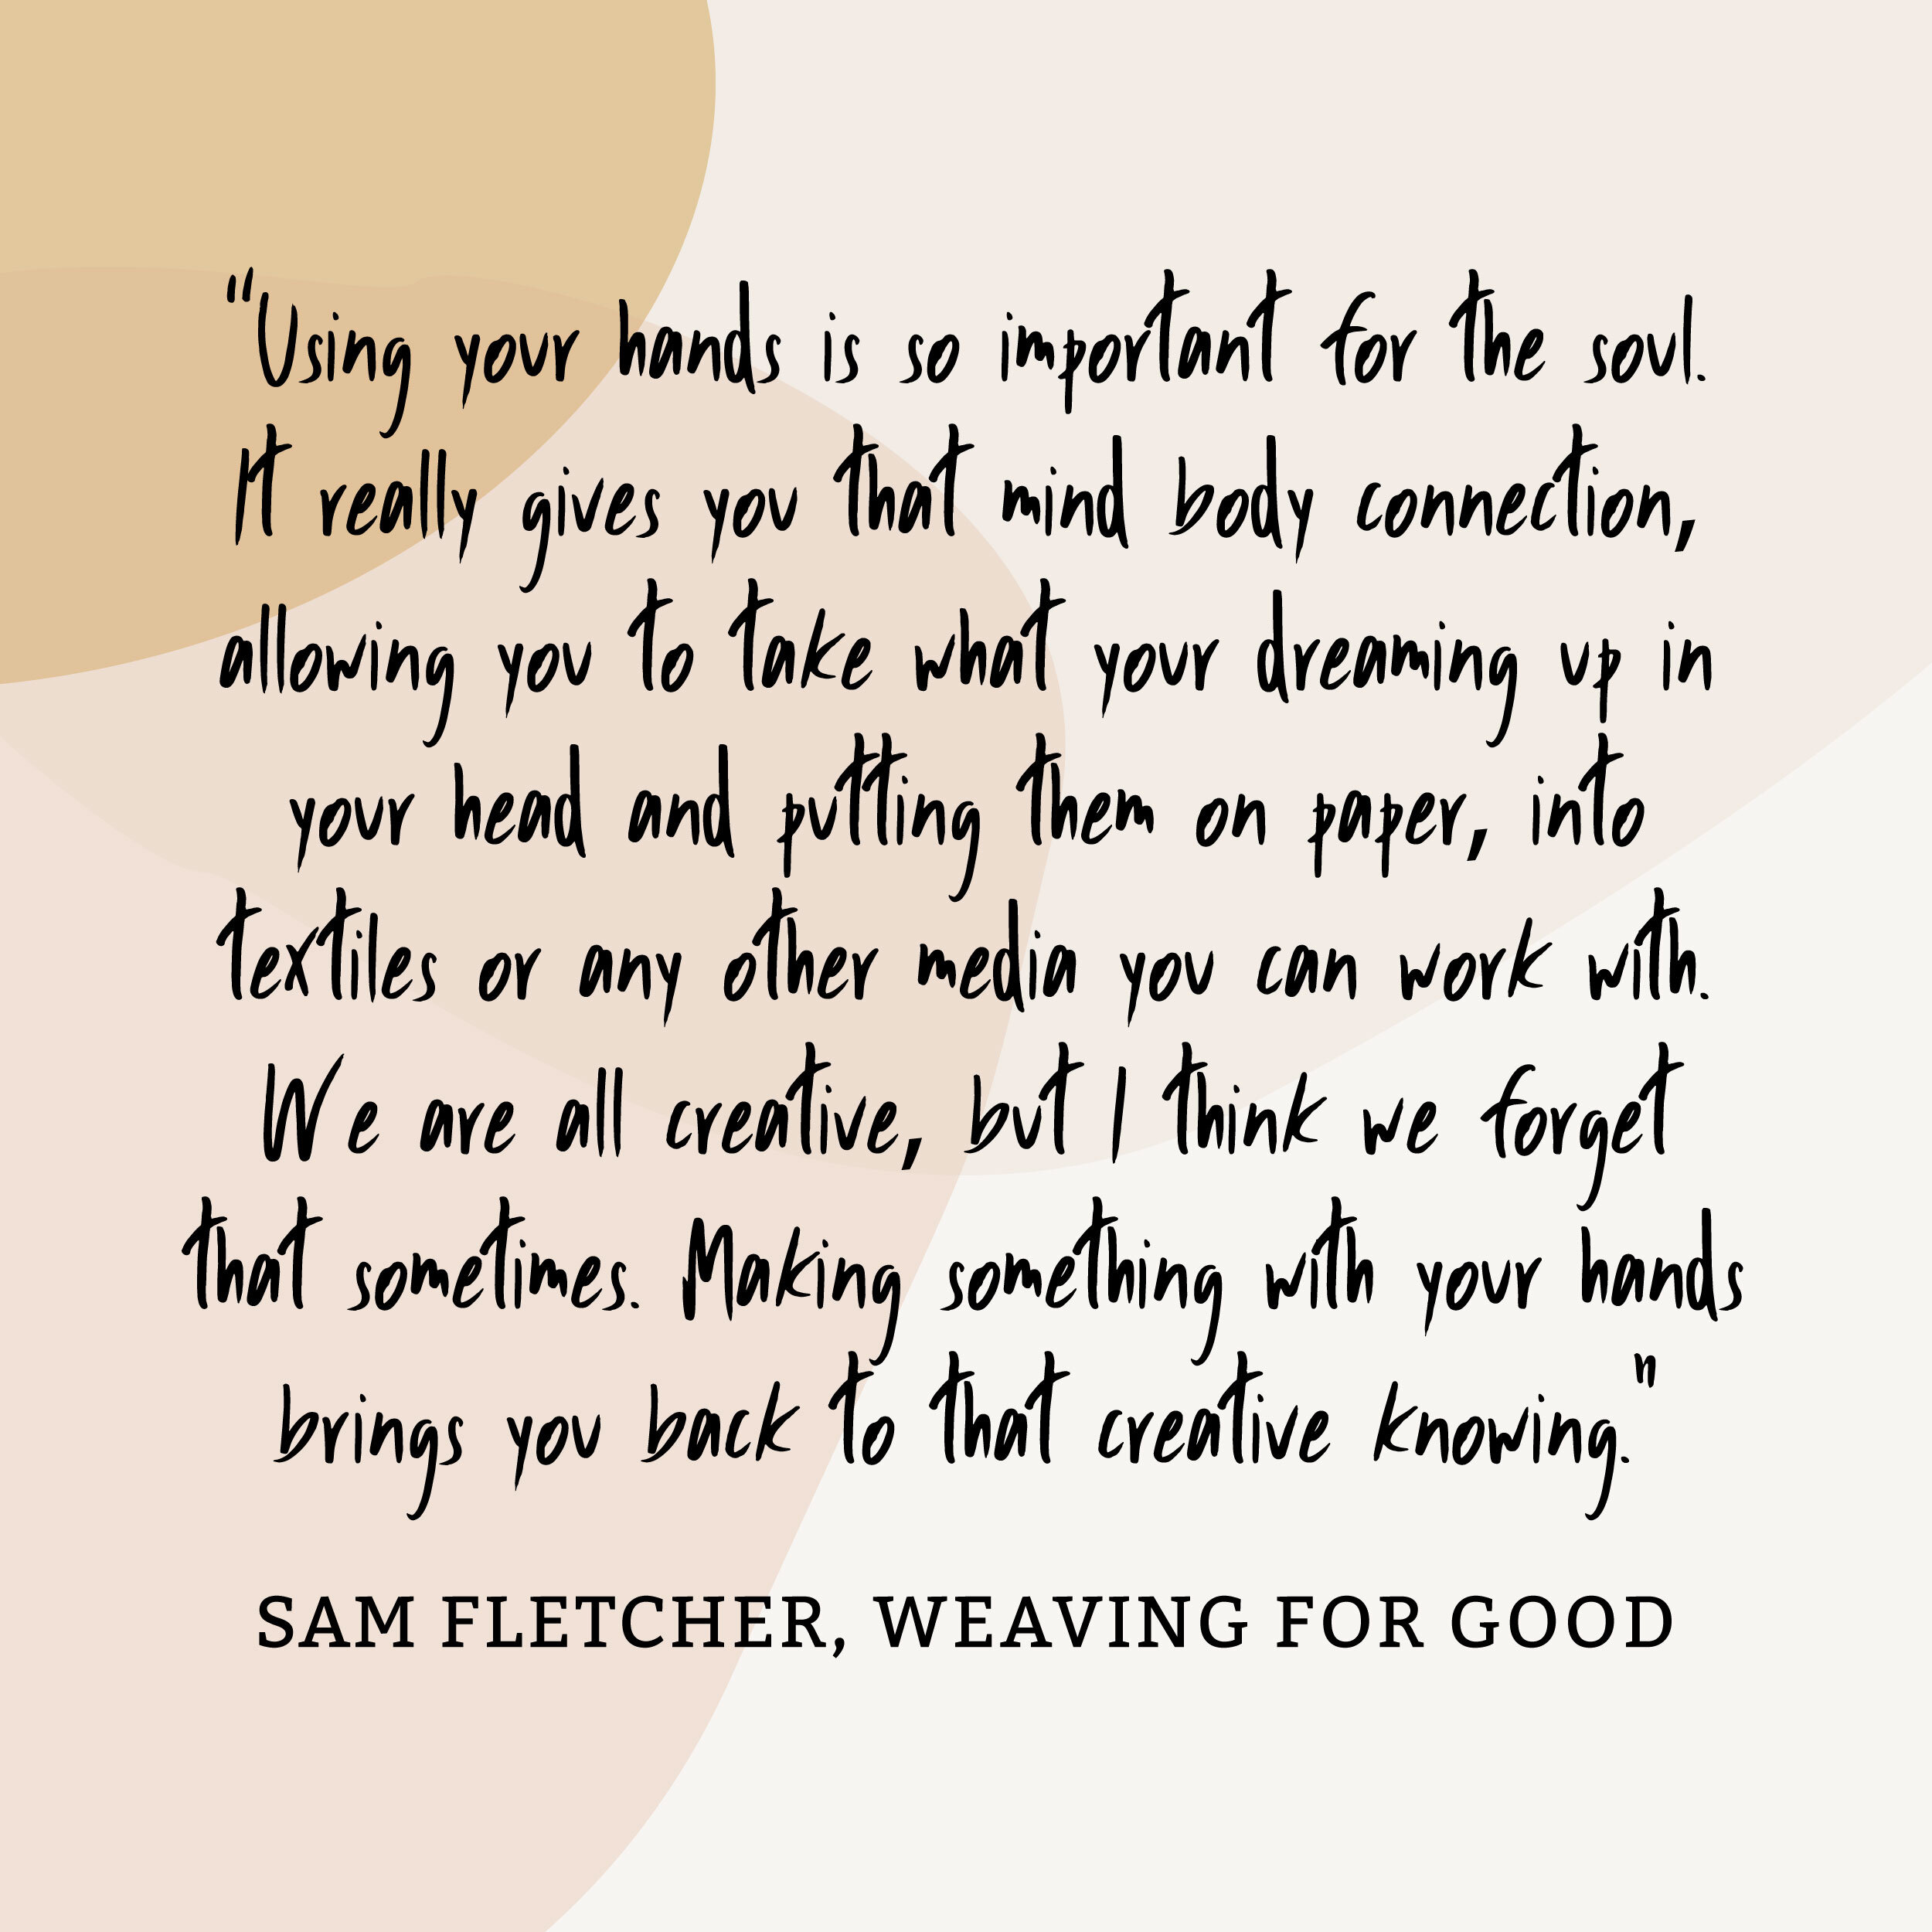 Why weaving is more important than ever!